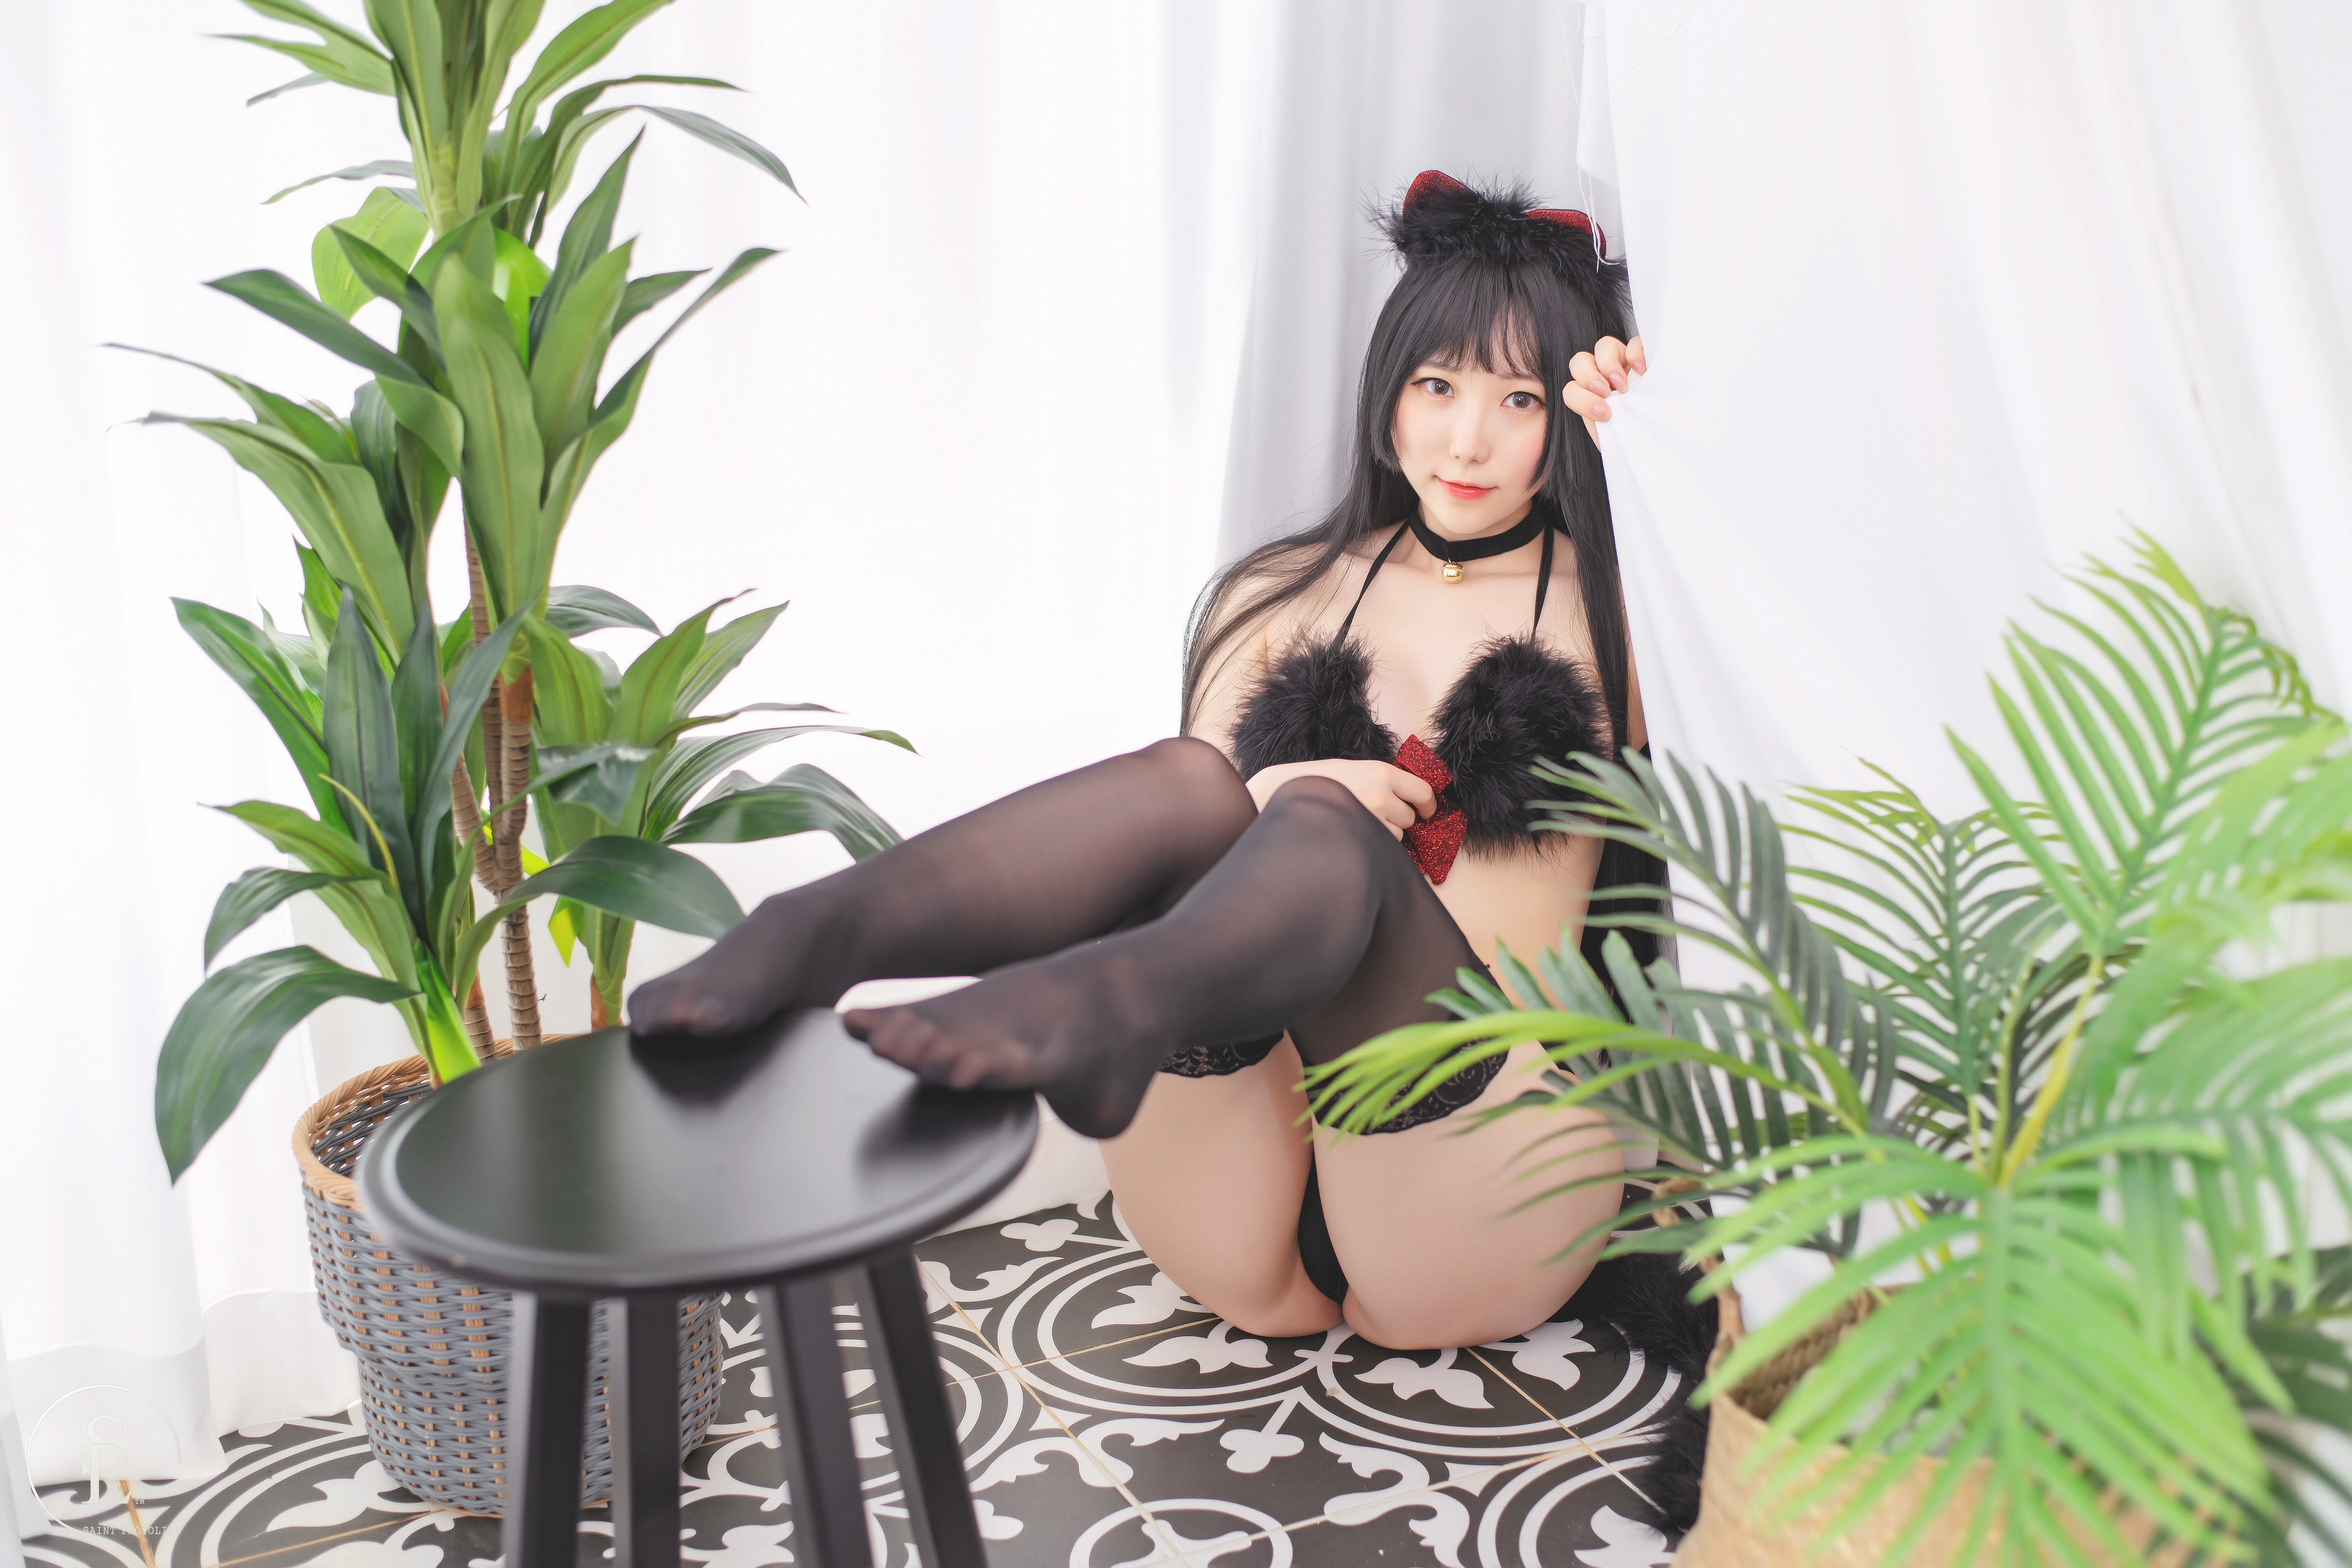 People 5000x3333 Jamong SAINT Photolife women model Asian cosplay cat girl cat ears lingerie stockings black stockings indoors women indoors pointed toes